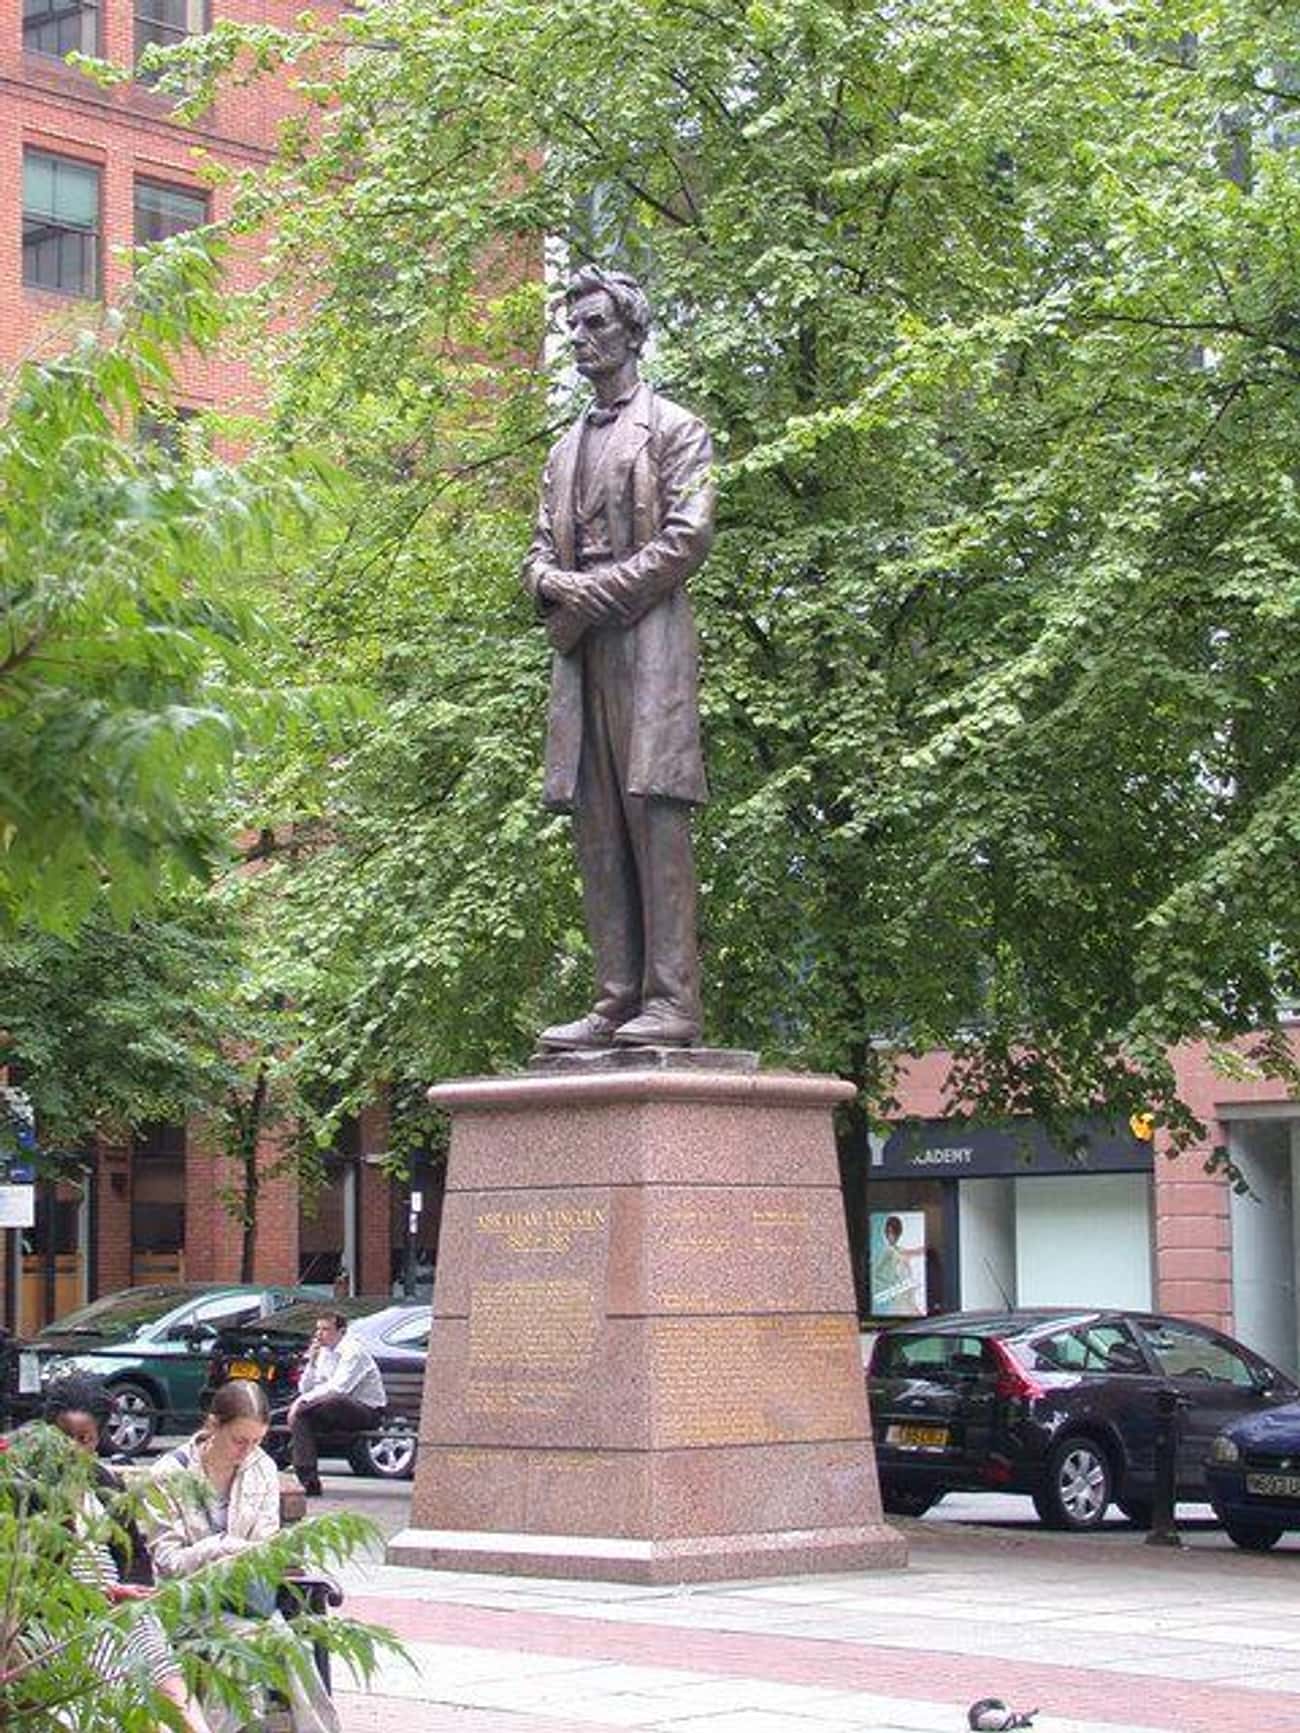 Abraham Lincoln Acknowledged Manchester's 'Sublime Christian Heroism' For Supporting The Cotton Blockade